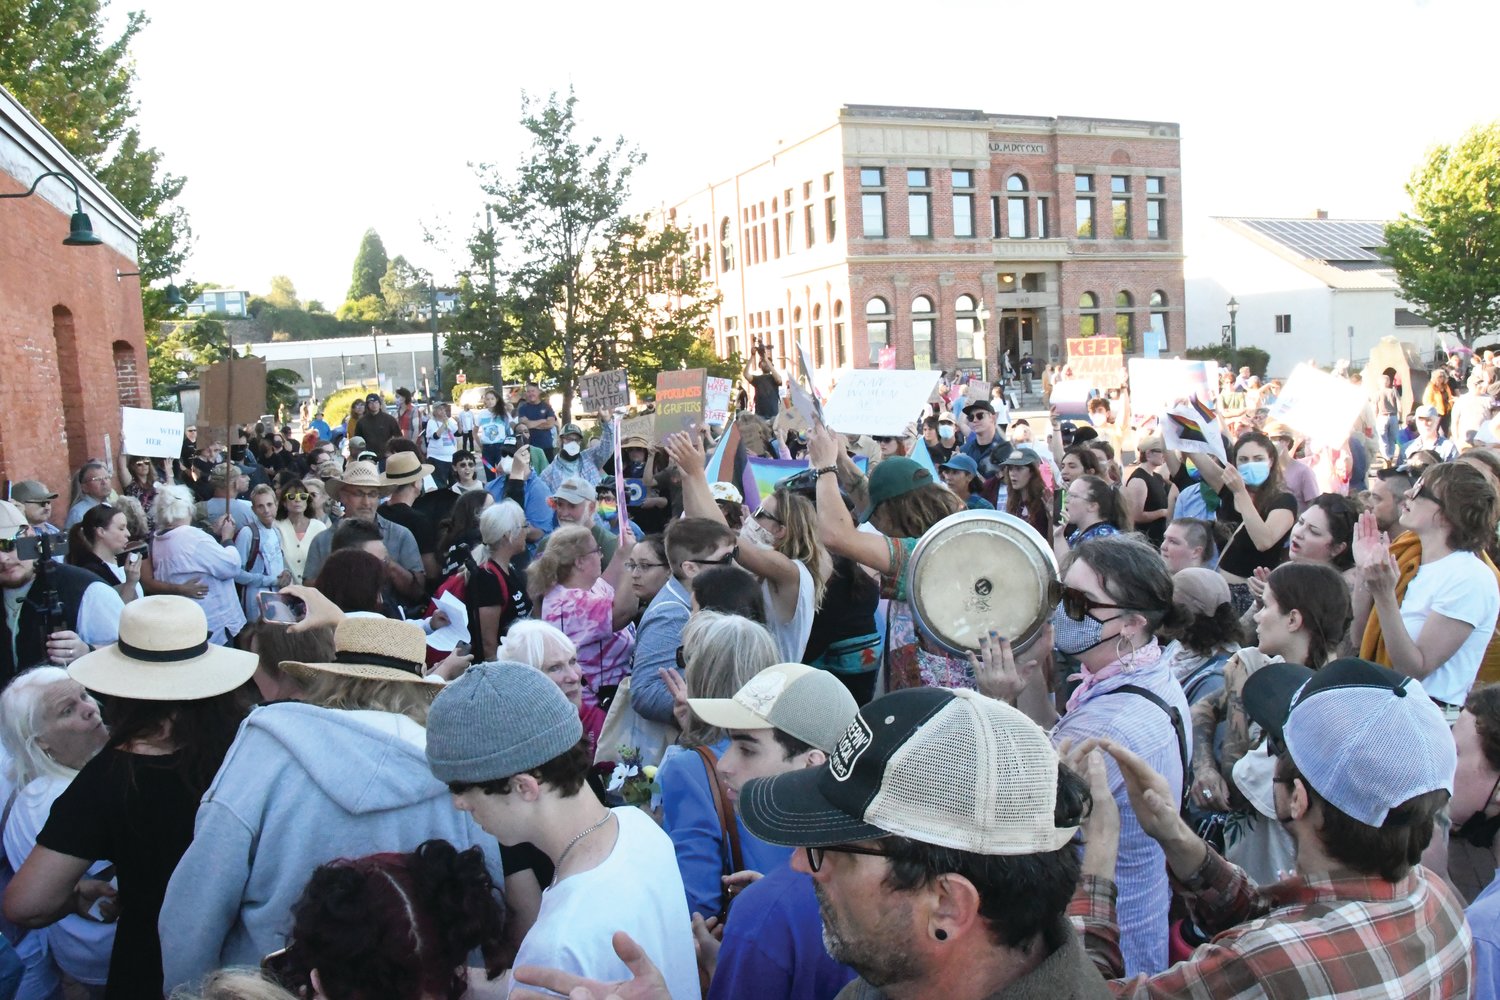 A crowd of 200-plus protesters surrounded anti-trans speakers at the Cotton Building next to Pope Marine Park Monday evening in Port Townsend.